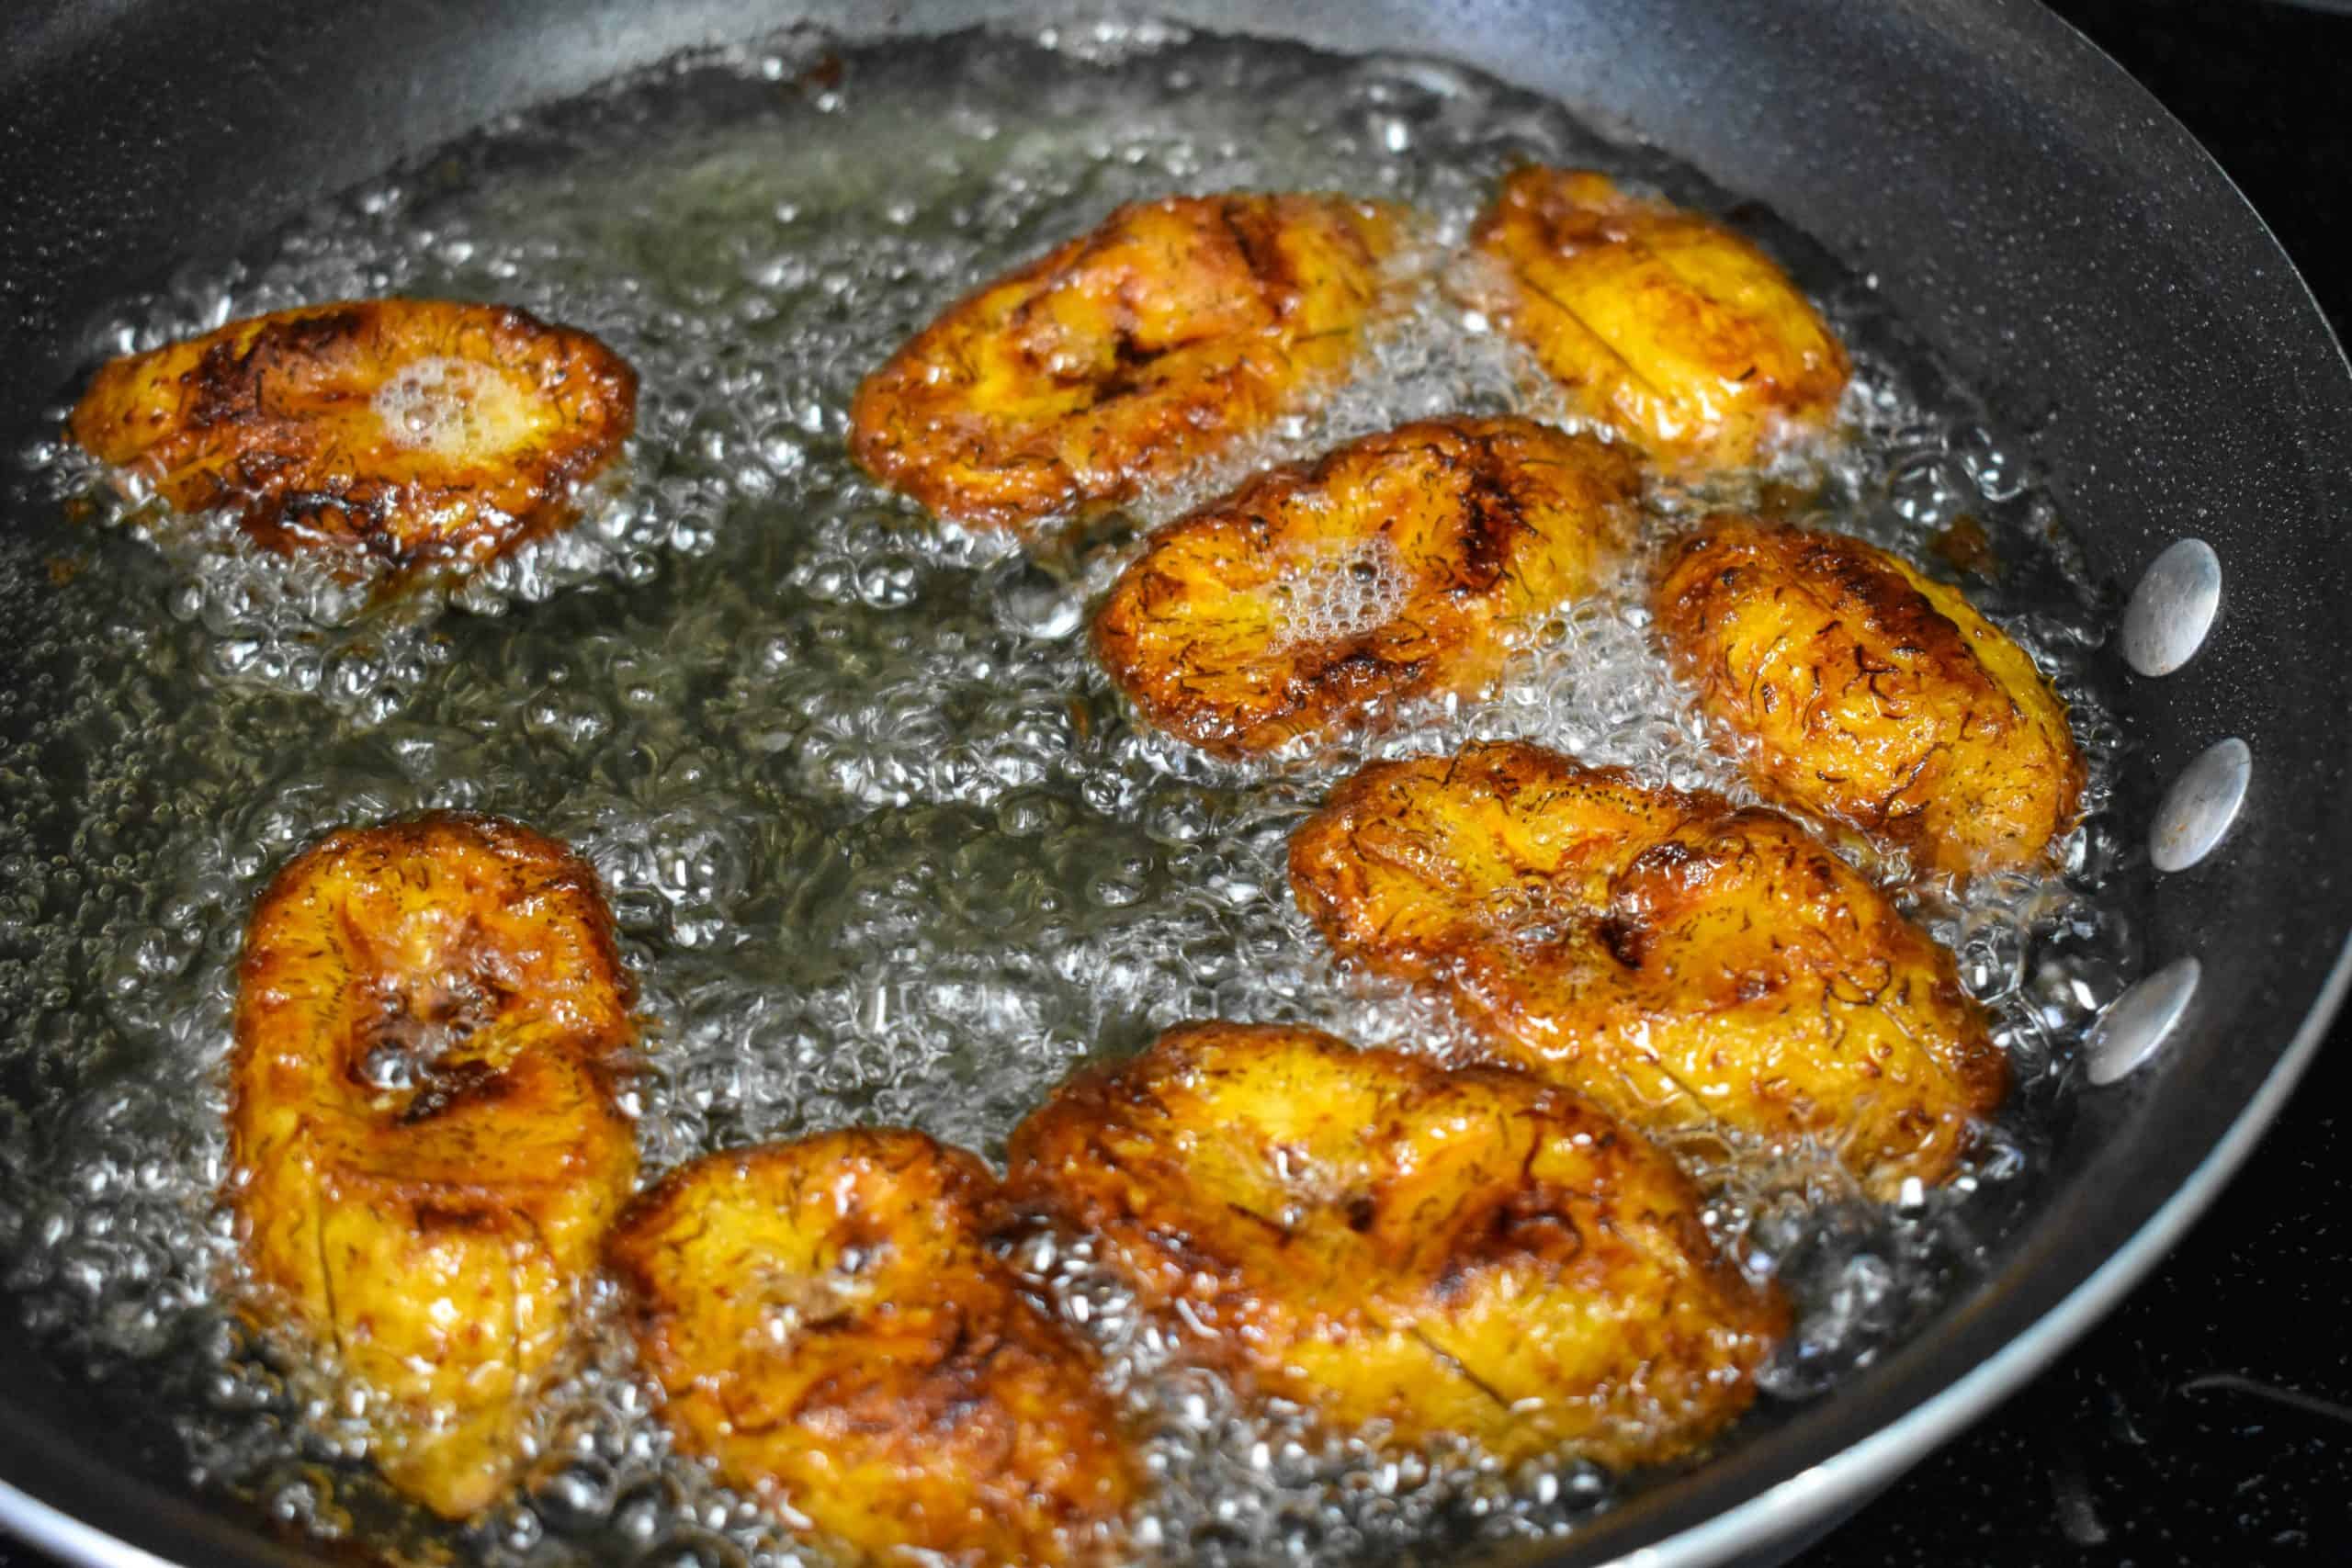 The plantains cooking in they skillet, now browned and caramelized on the edges.